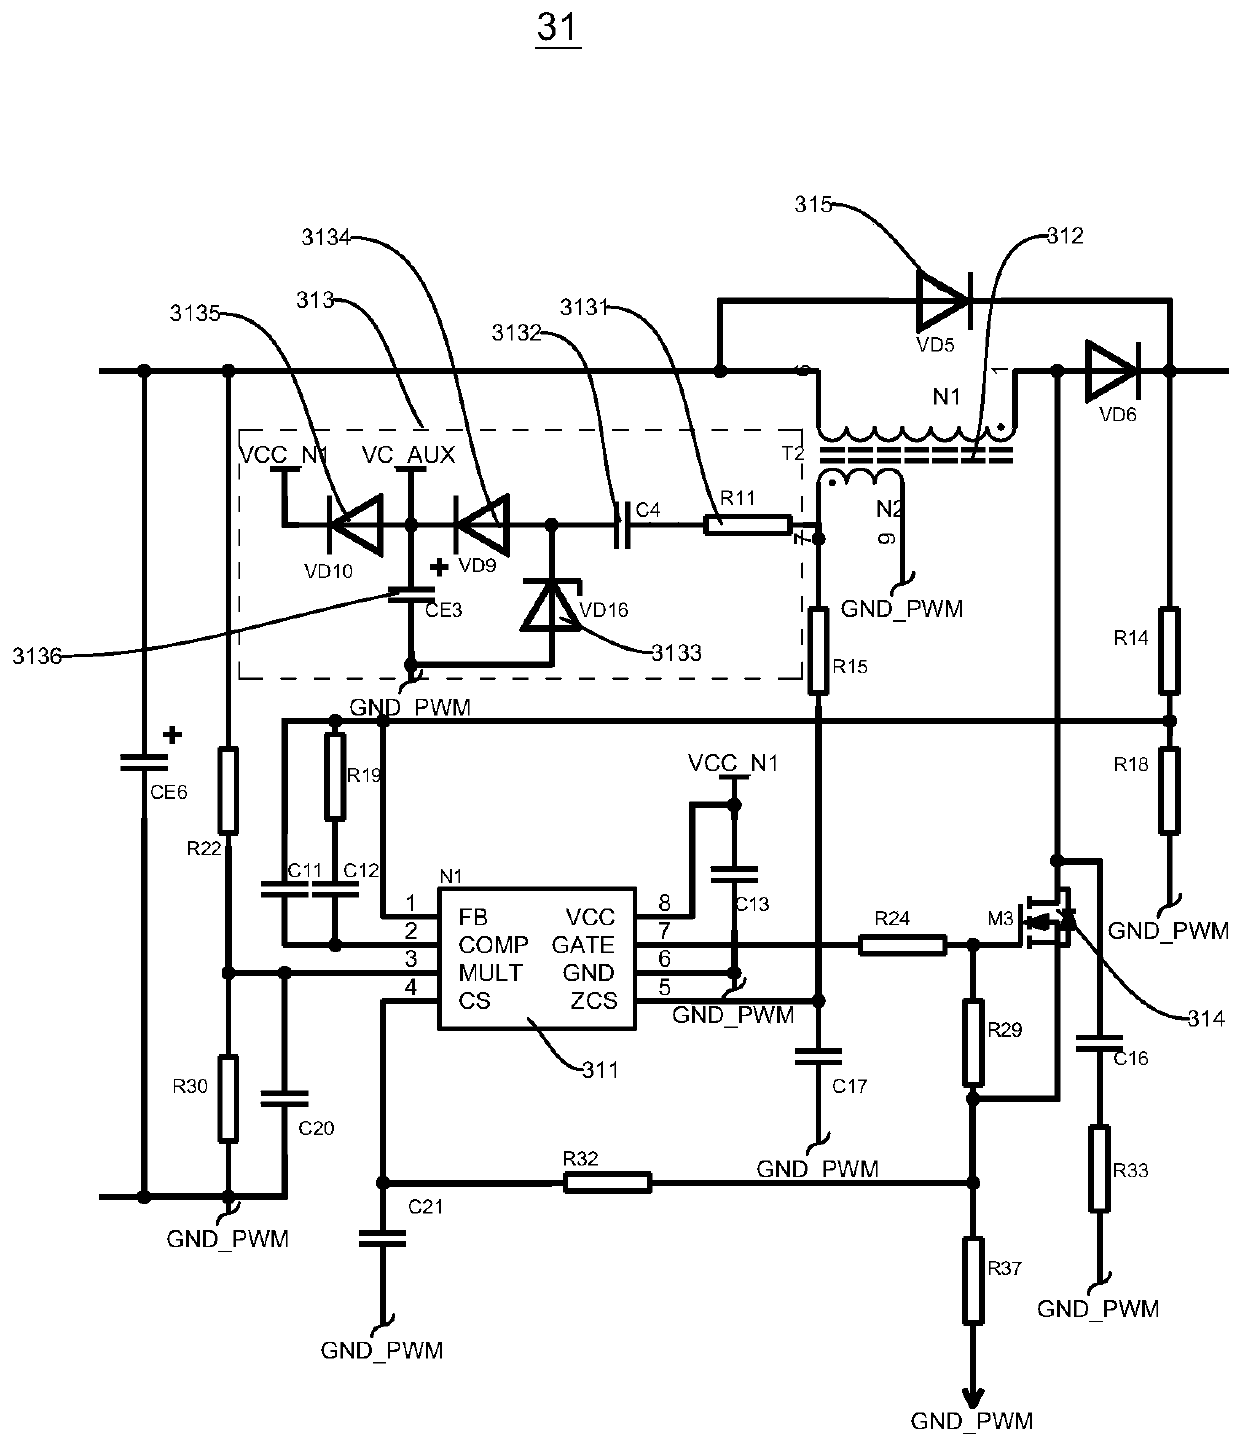 A wide voltage power supply input circuit